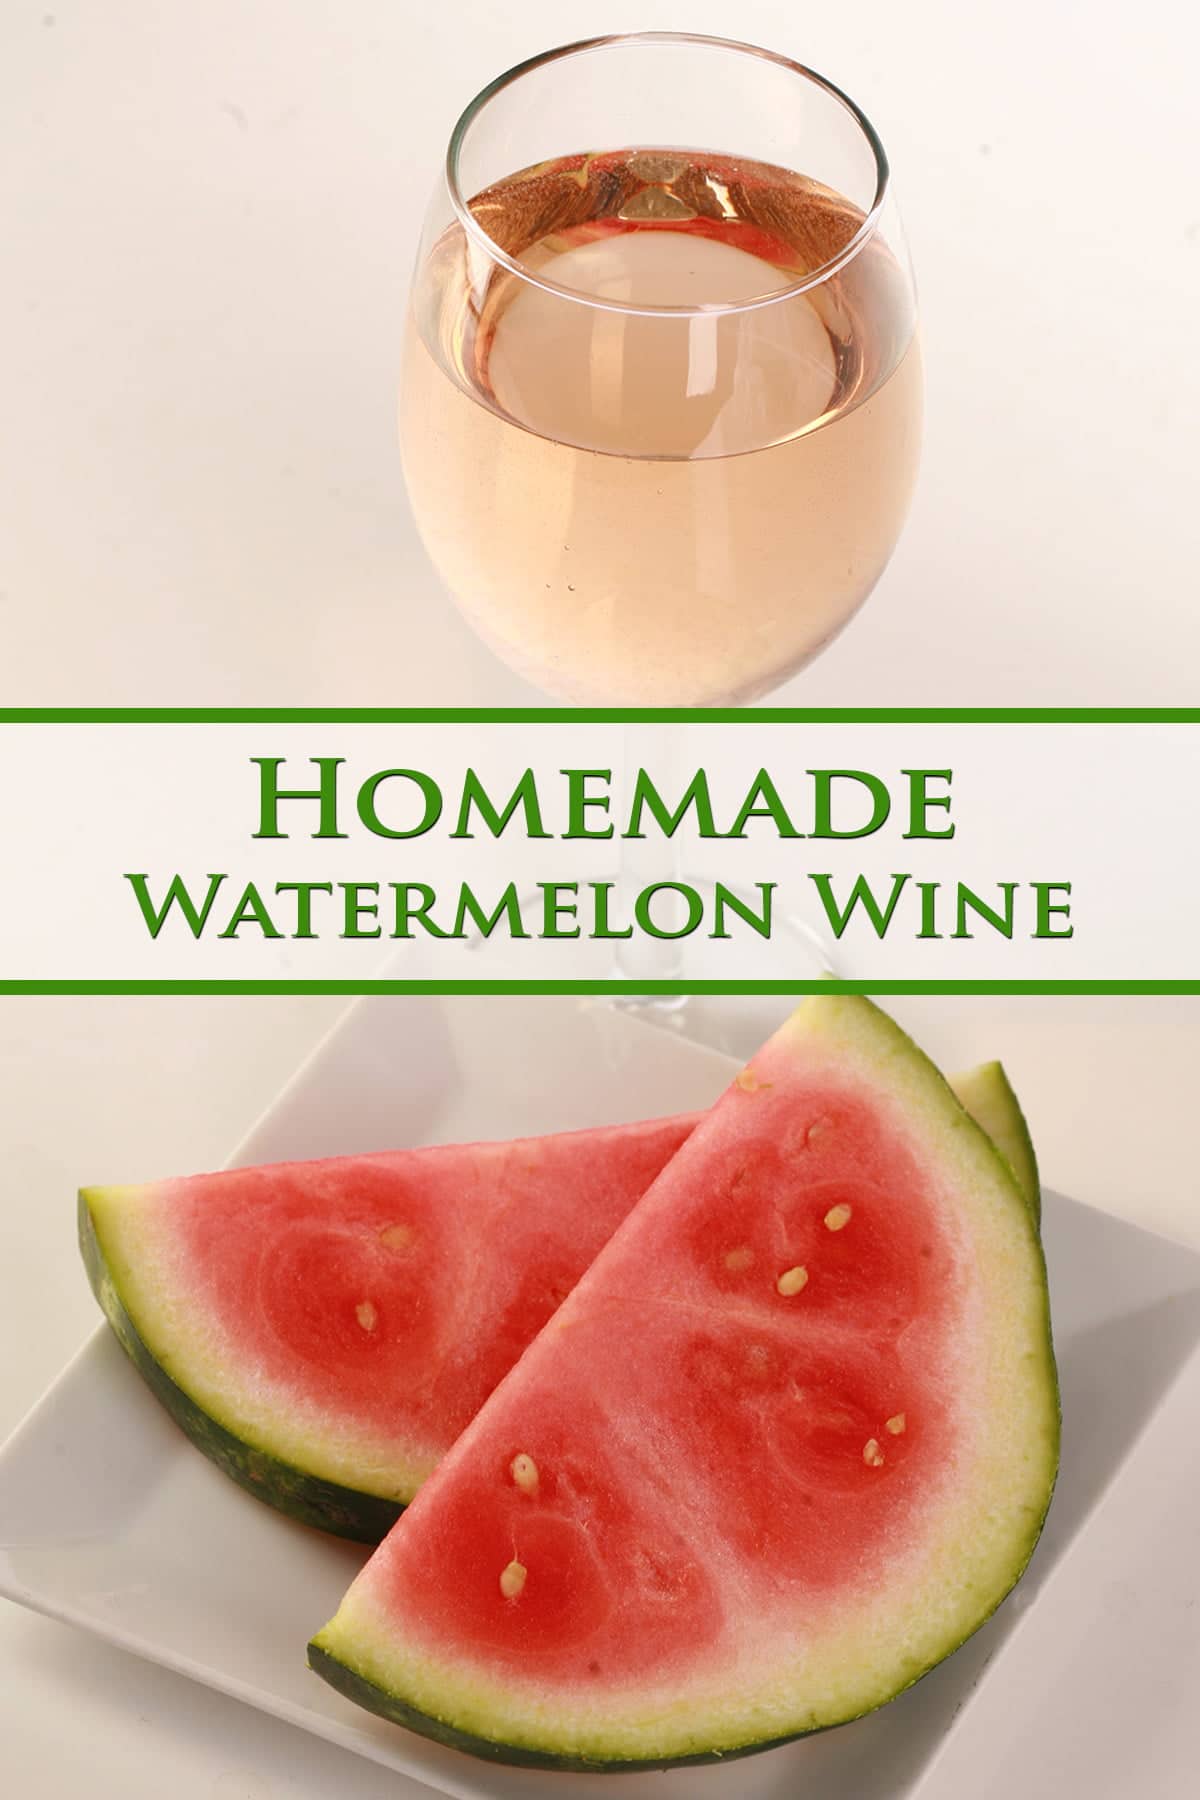 A glass of pale pink wine, next to a white plate with watermelon slices on it.